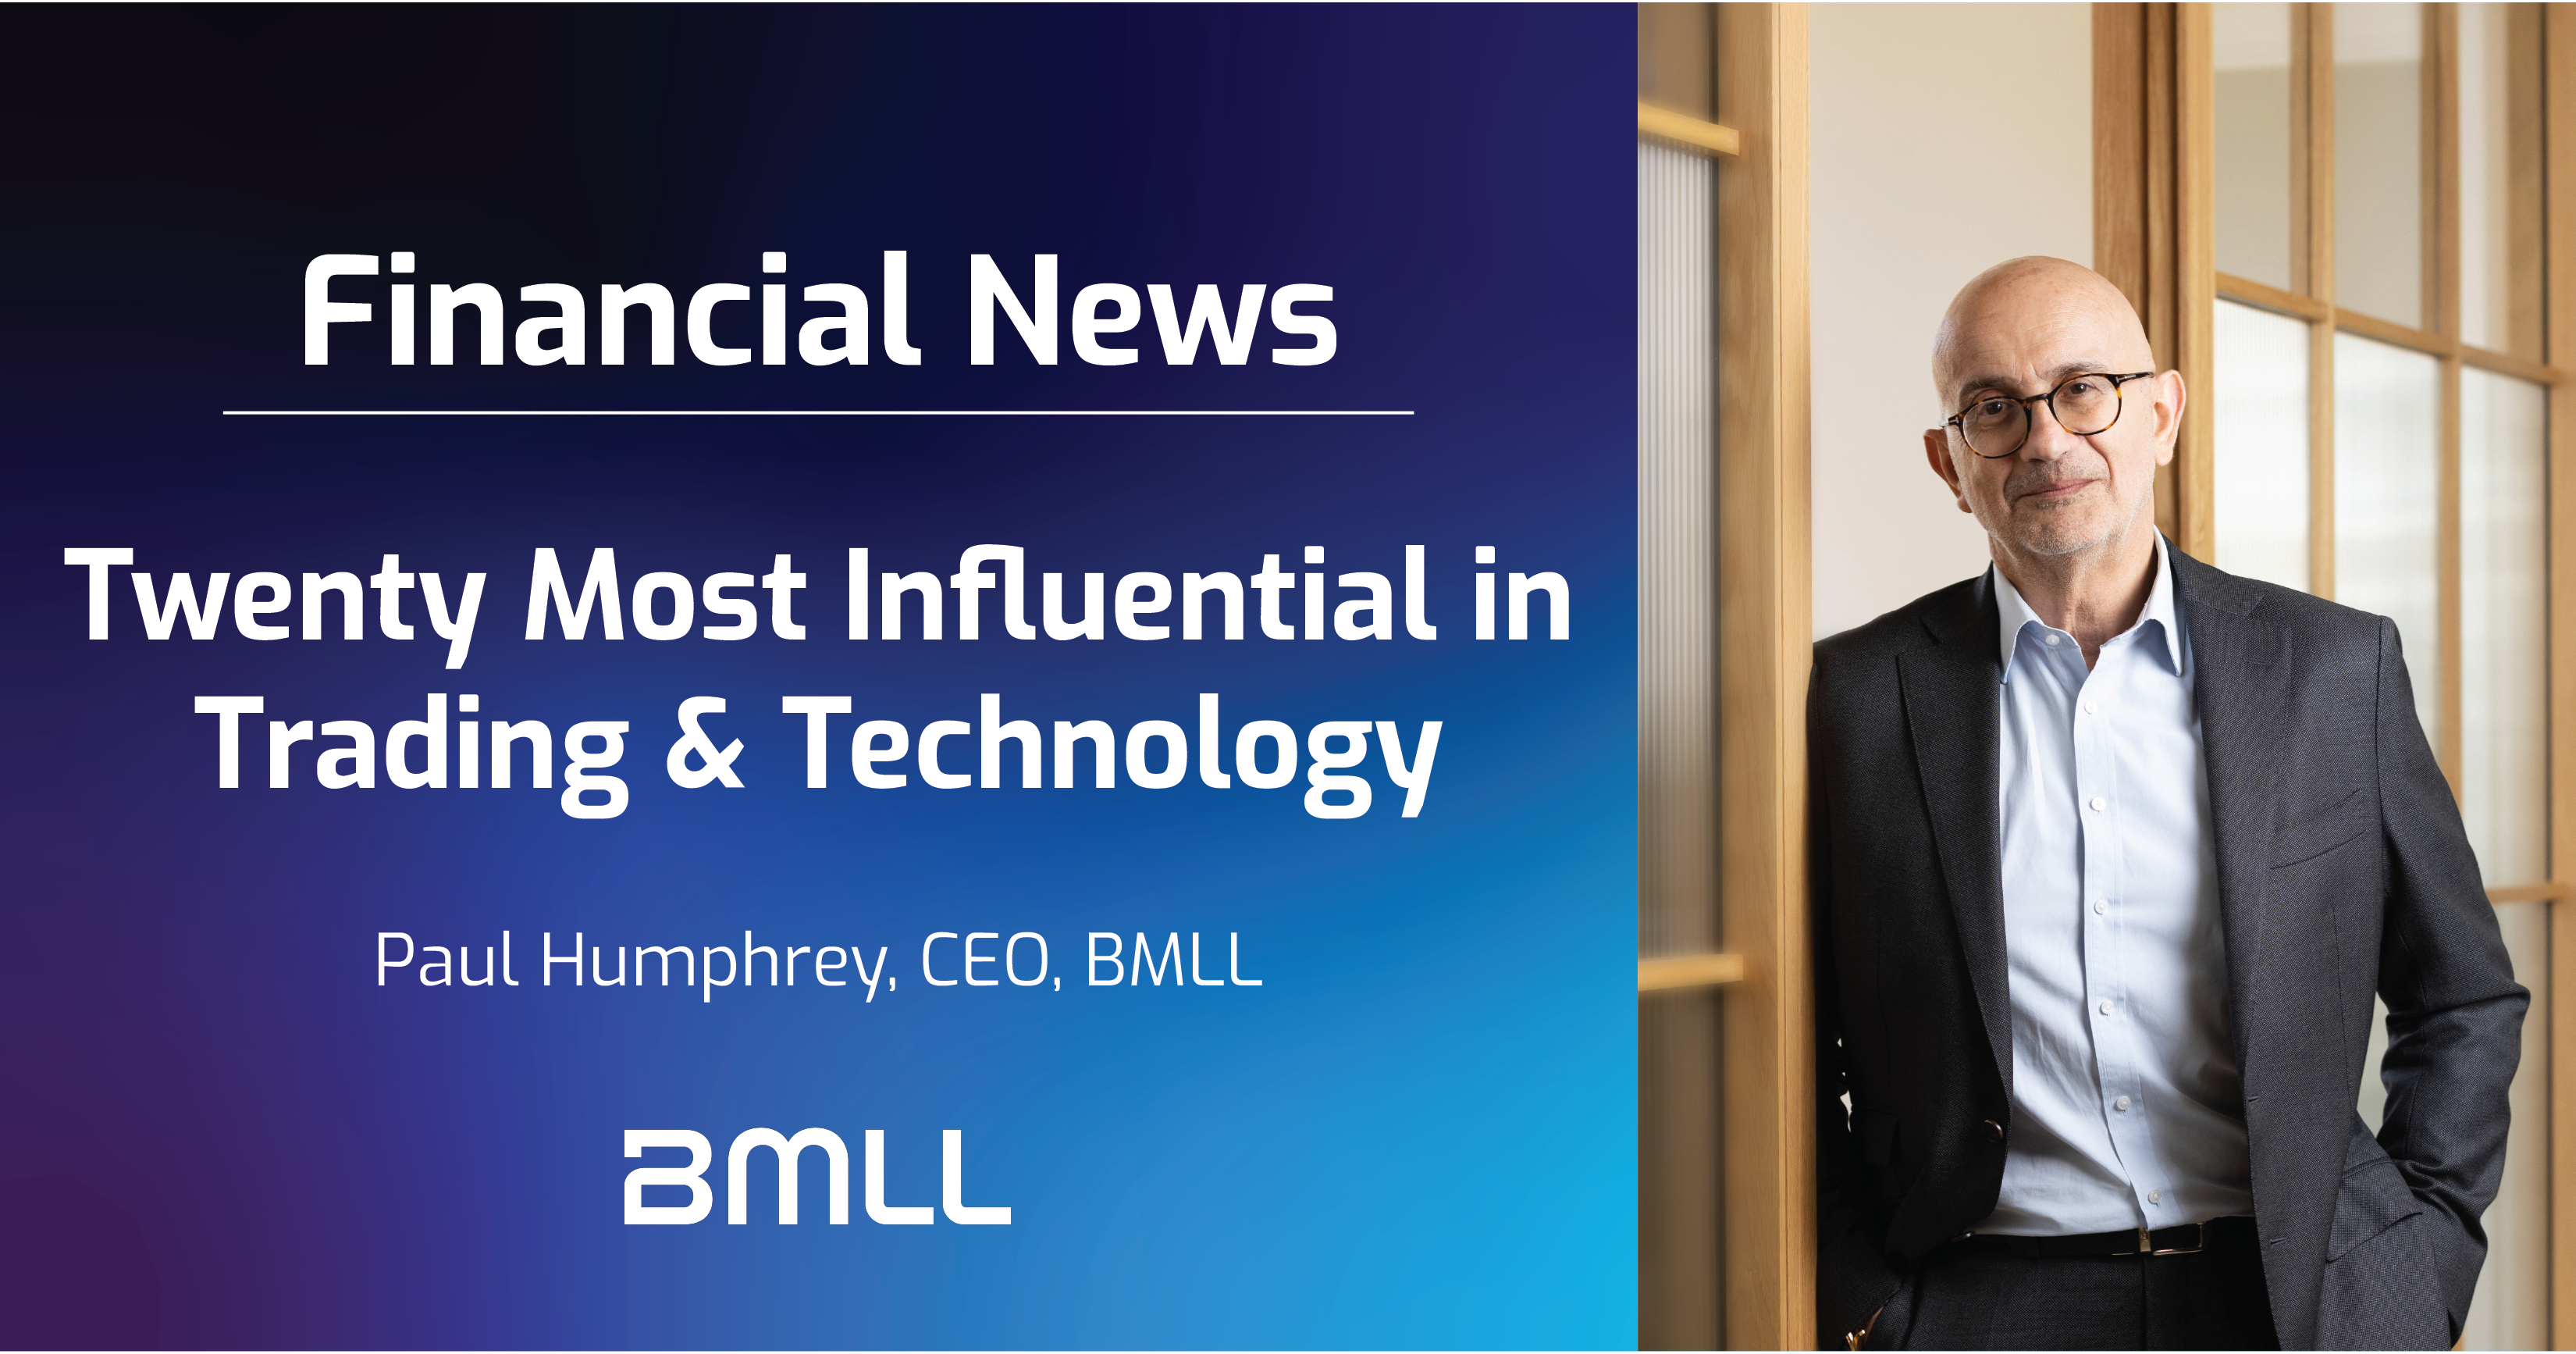 Photo for BMLL CEO Paul Humphrey recognised in the Financial News ‘20 Most Influential in Trading & Technology’ news story